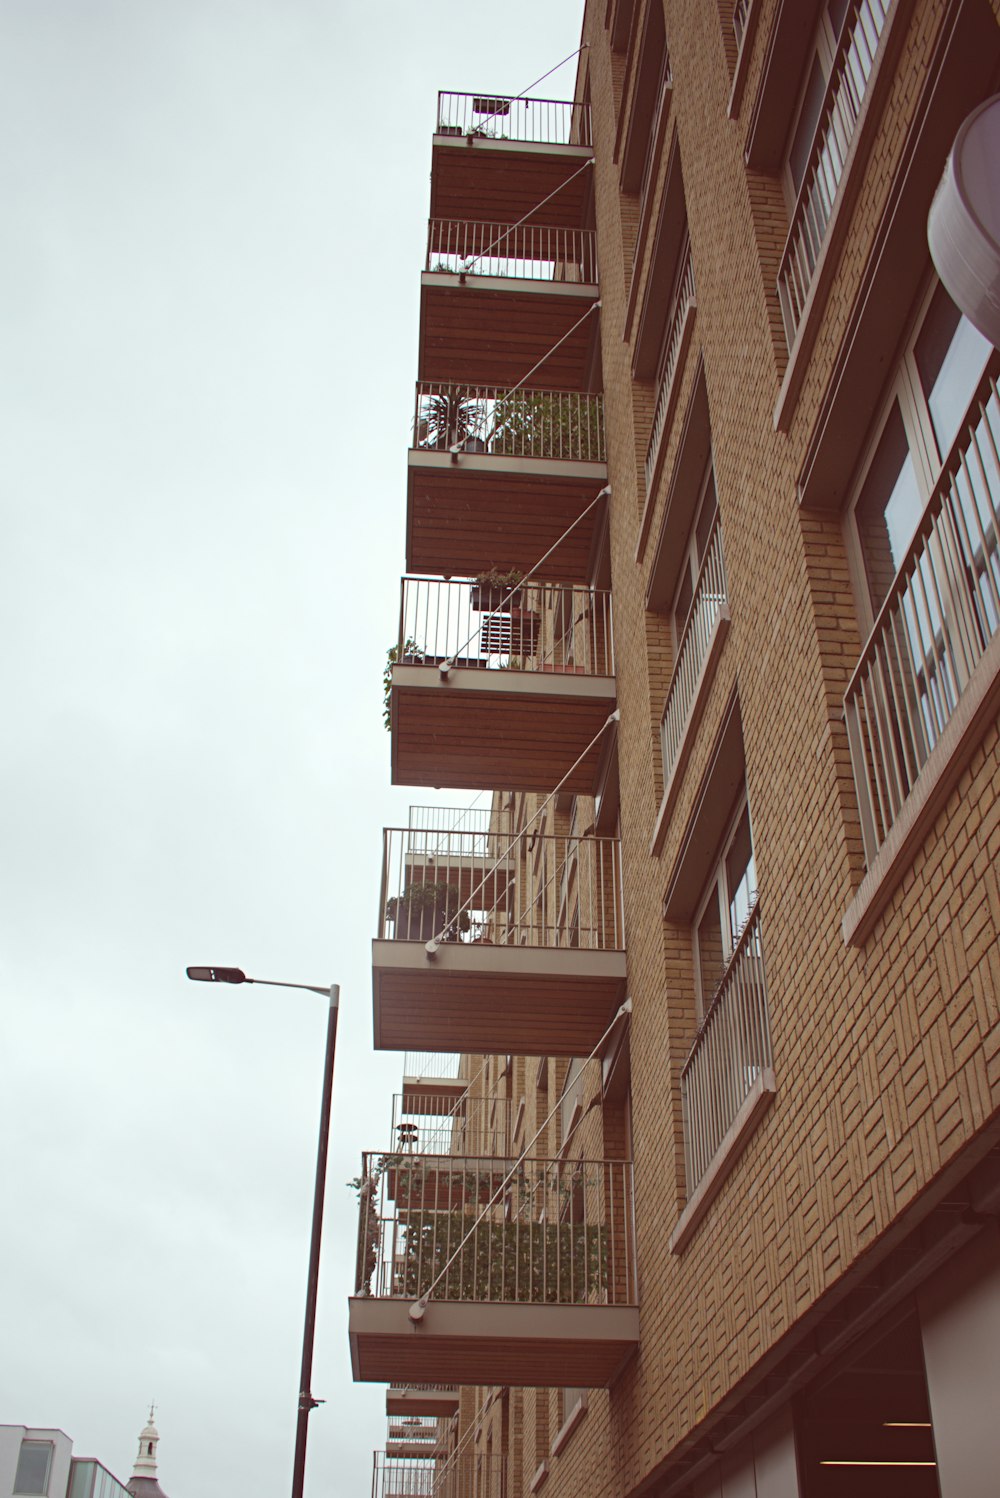 a tall brick building with balconies and balconies